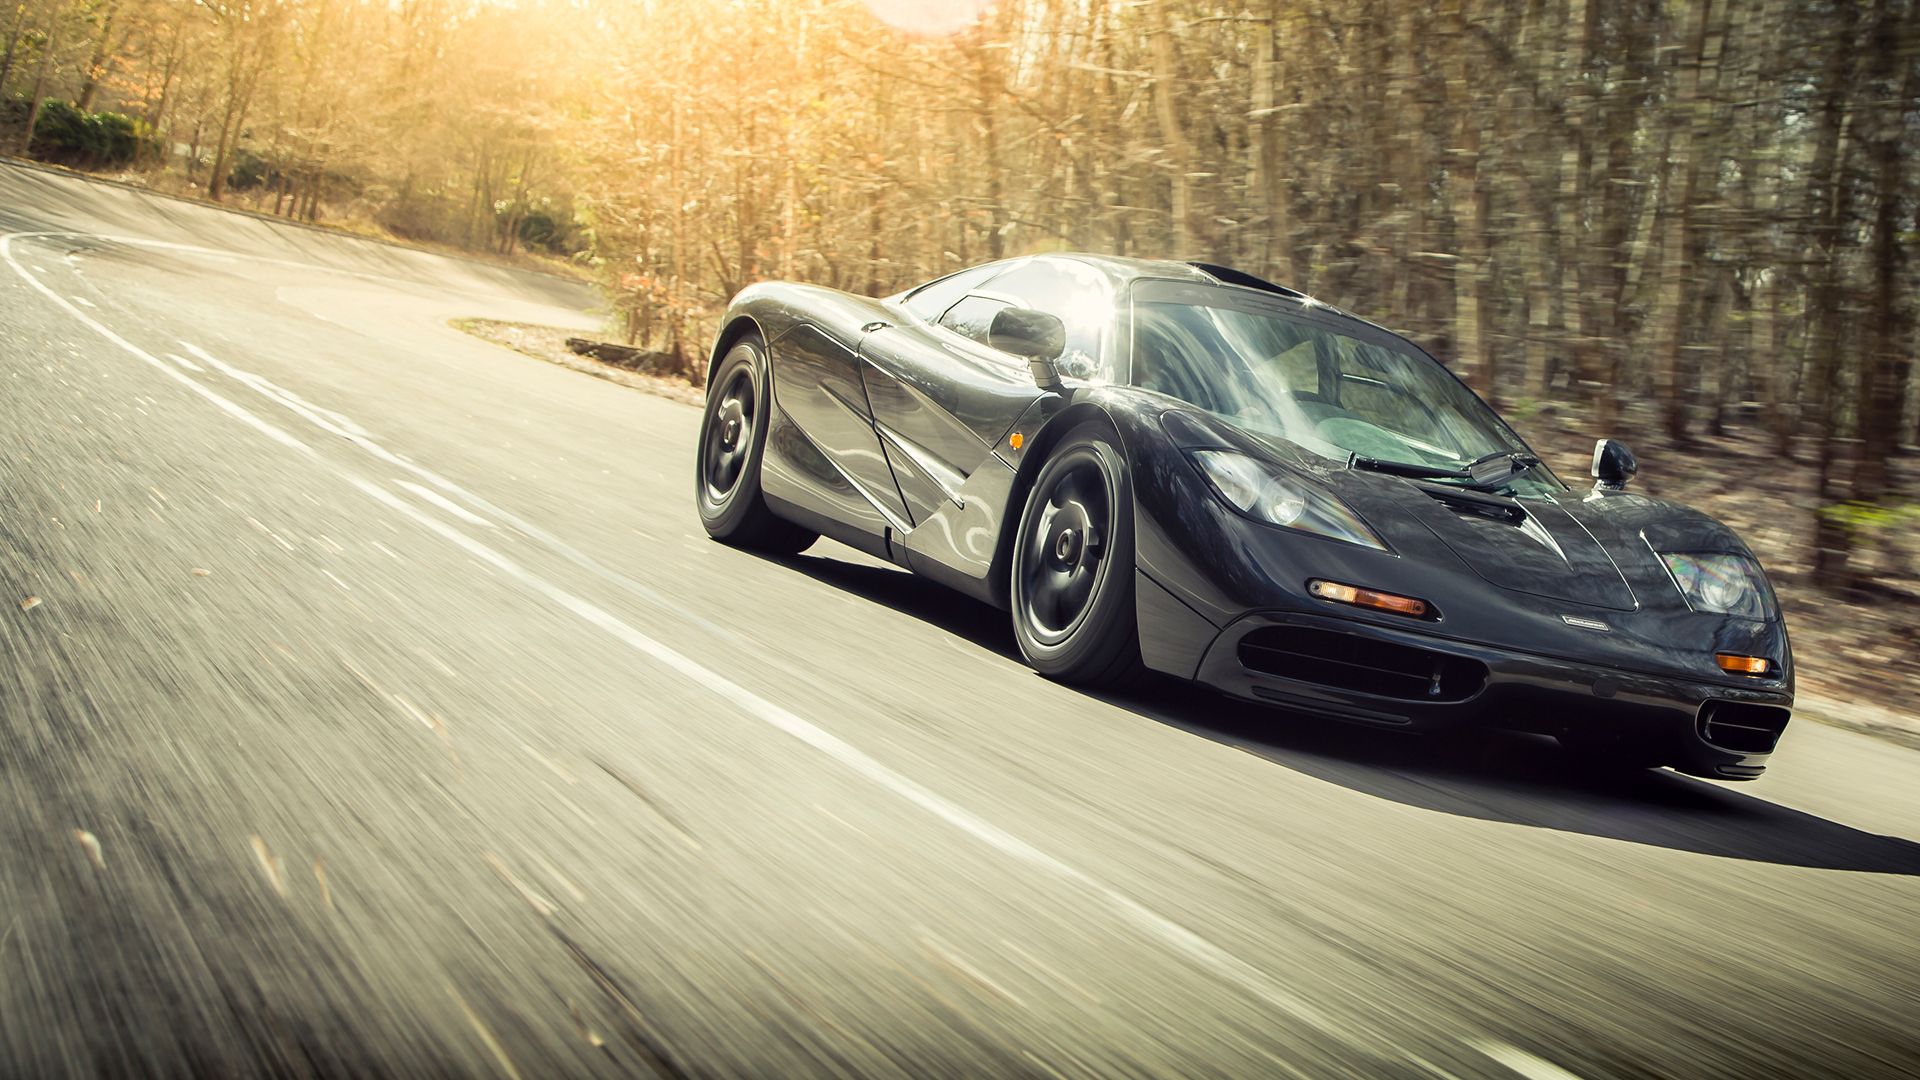 McLaren F1 driving through countryside surrounded by trees